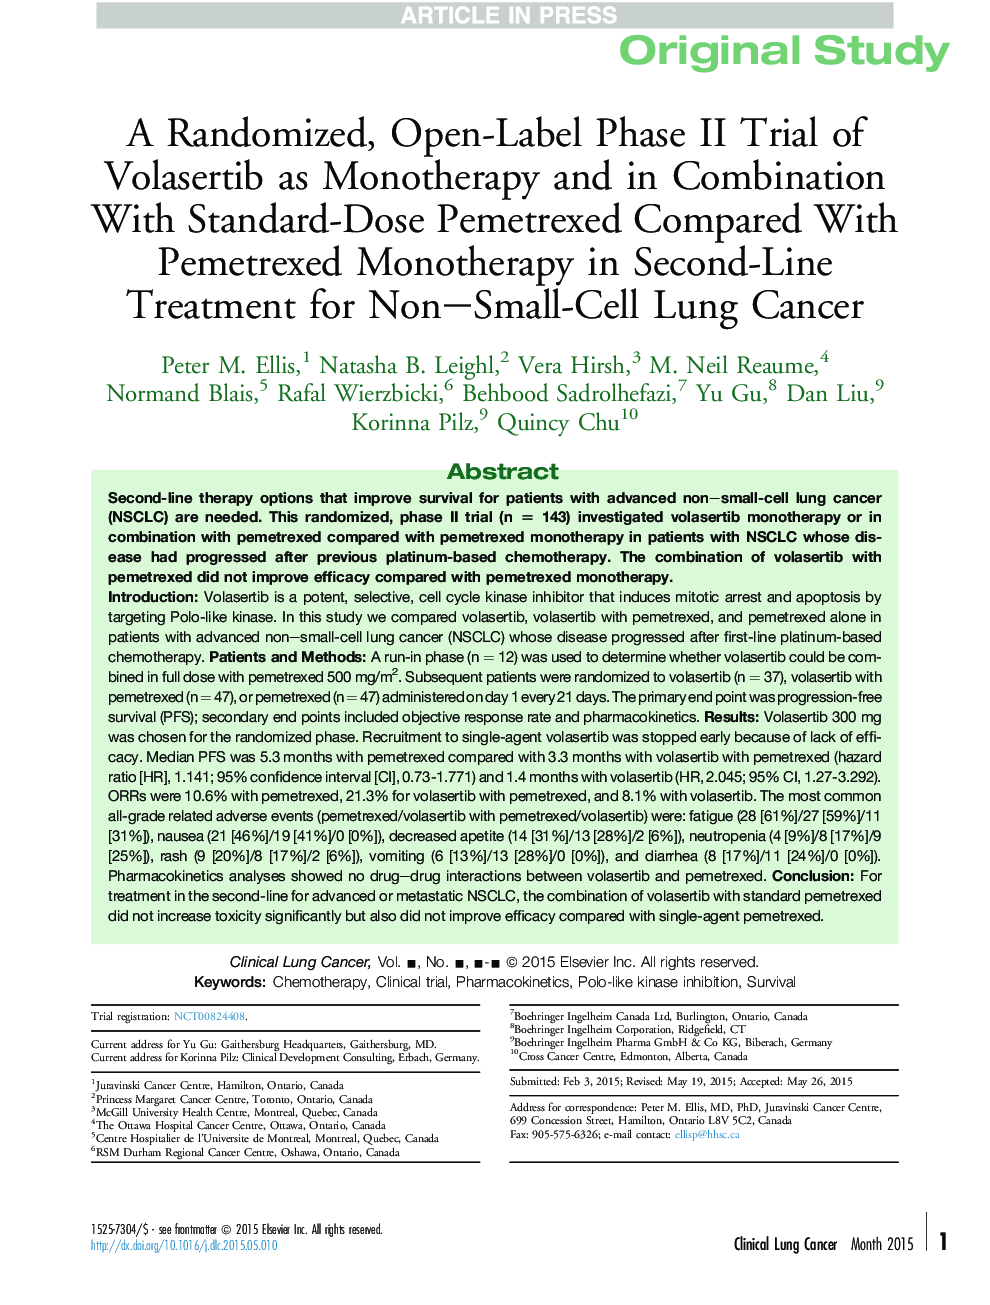 A Randomized, Open-Label Phase II Trial of Volasertib as Monotherapy and in Combination With Standard-Dose Pemetrexed Compared With Pemetrexed Monotherapy in Second-Line Treatment for Non-Small-Cell Lung Cancer